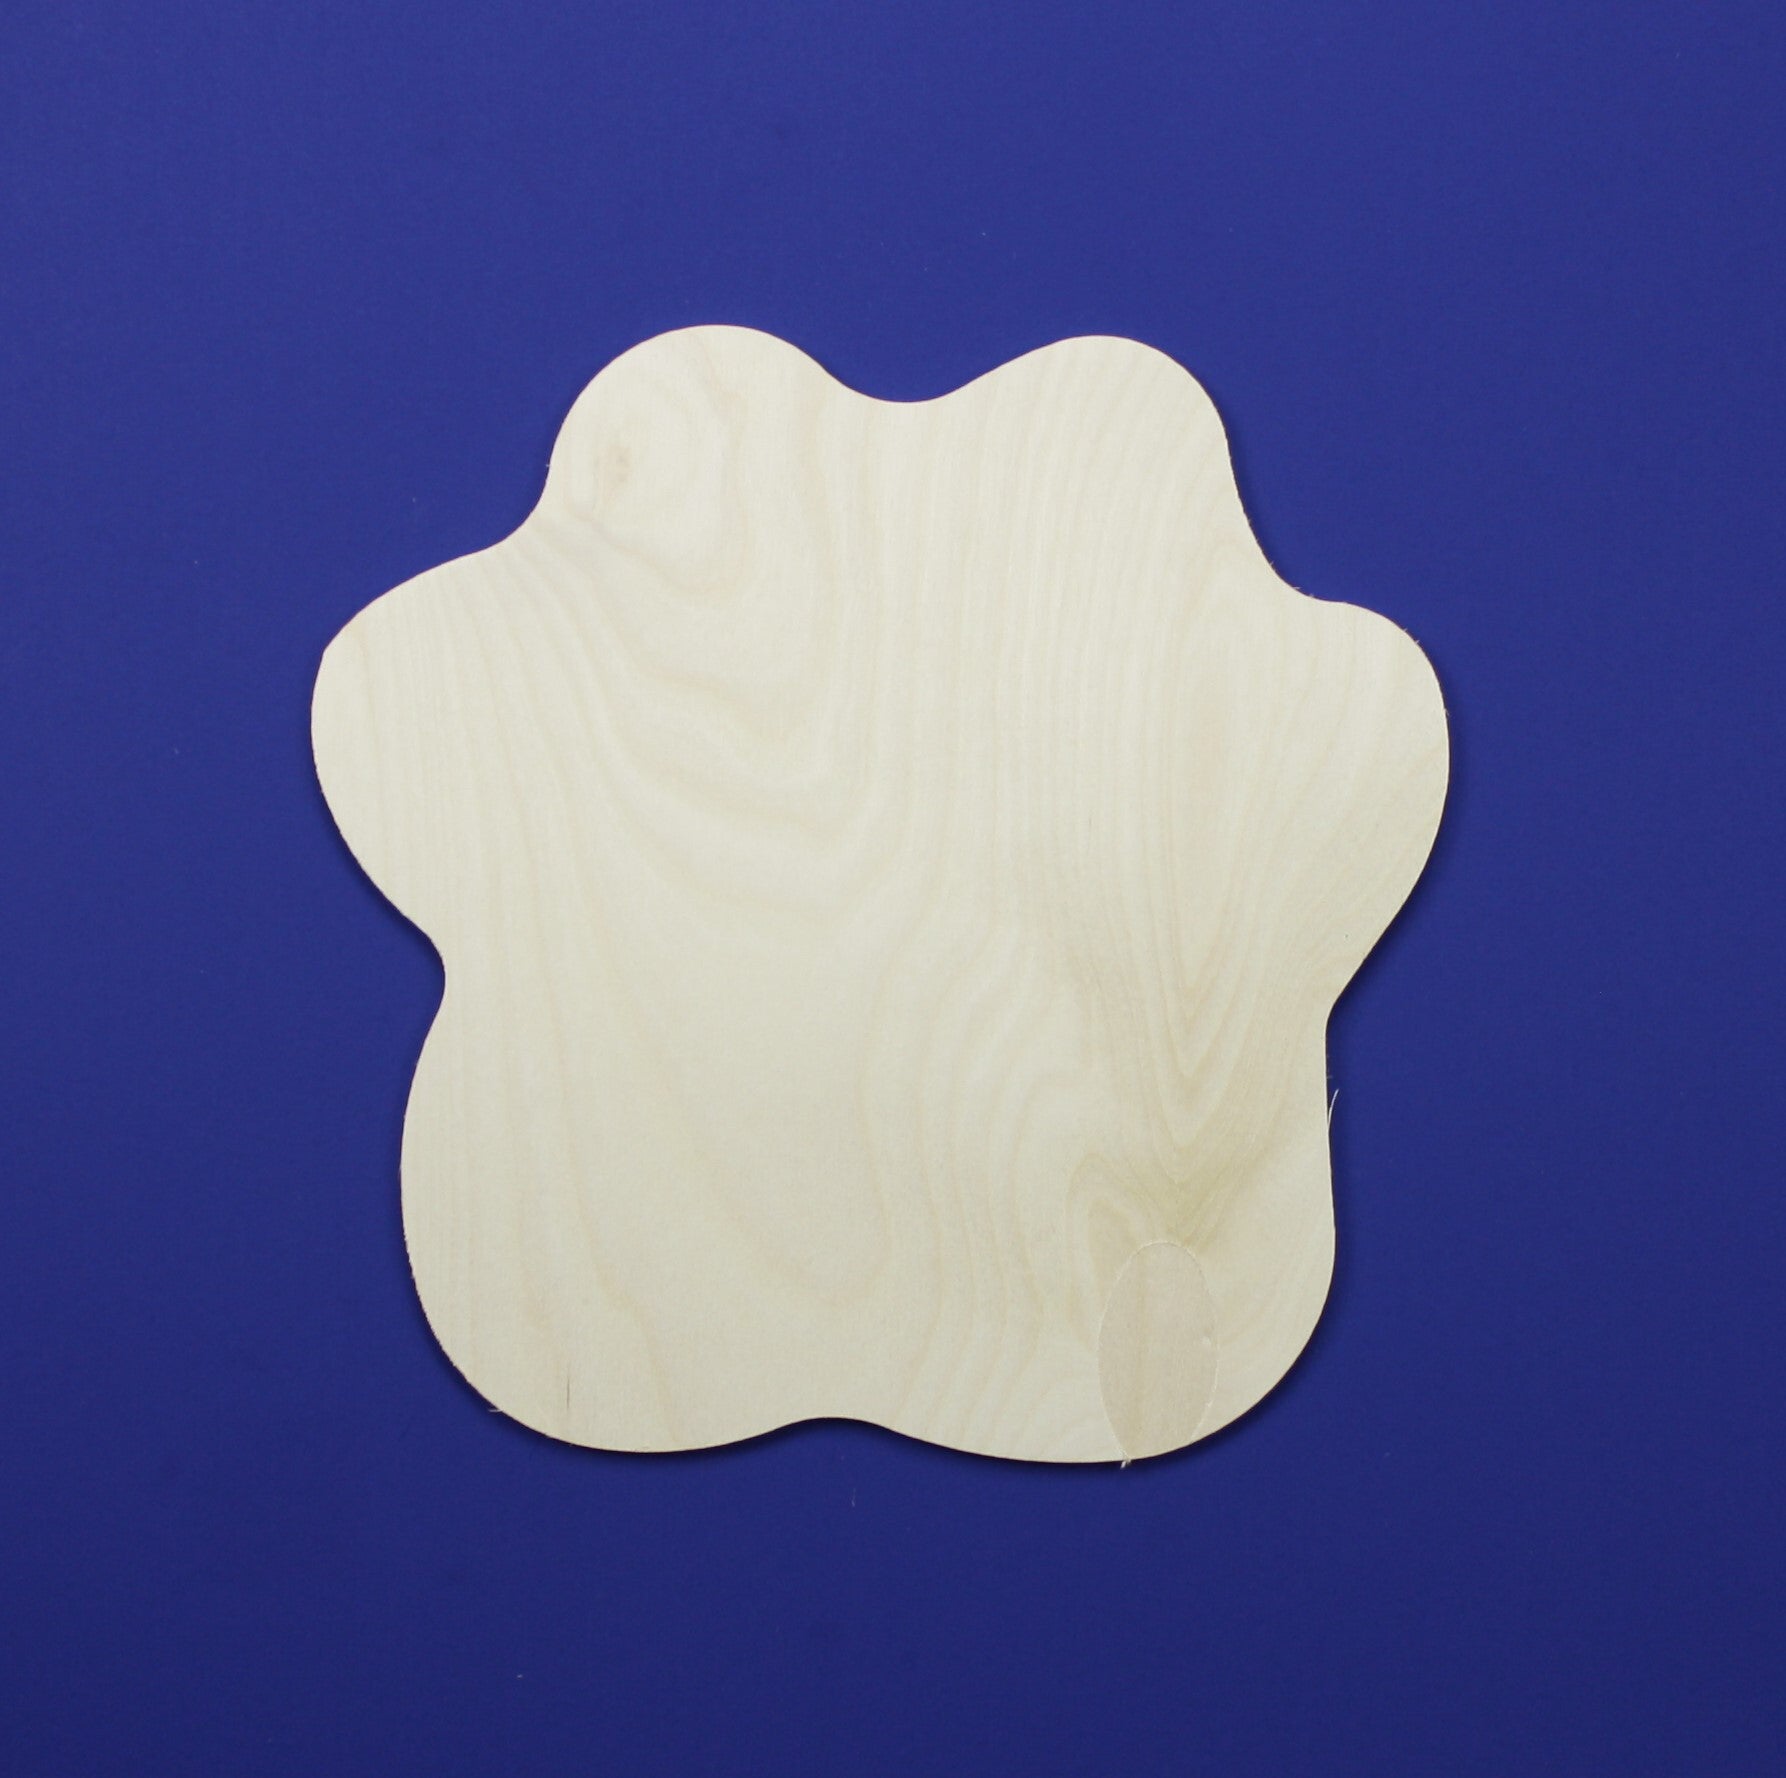 Sand Dollar Wooden Cutouts for crafts, Laser Cut Wood Shapes 5mm thick  Baltic Birch Wood, Multiple Sizes Available